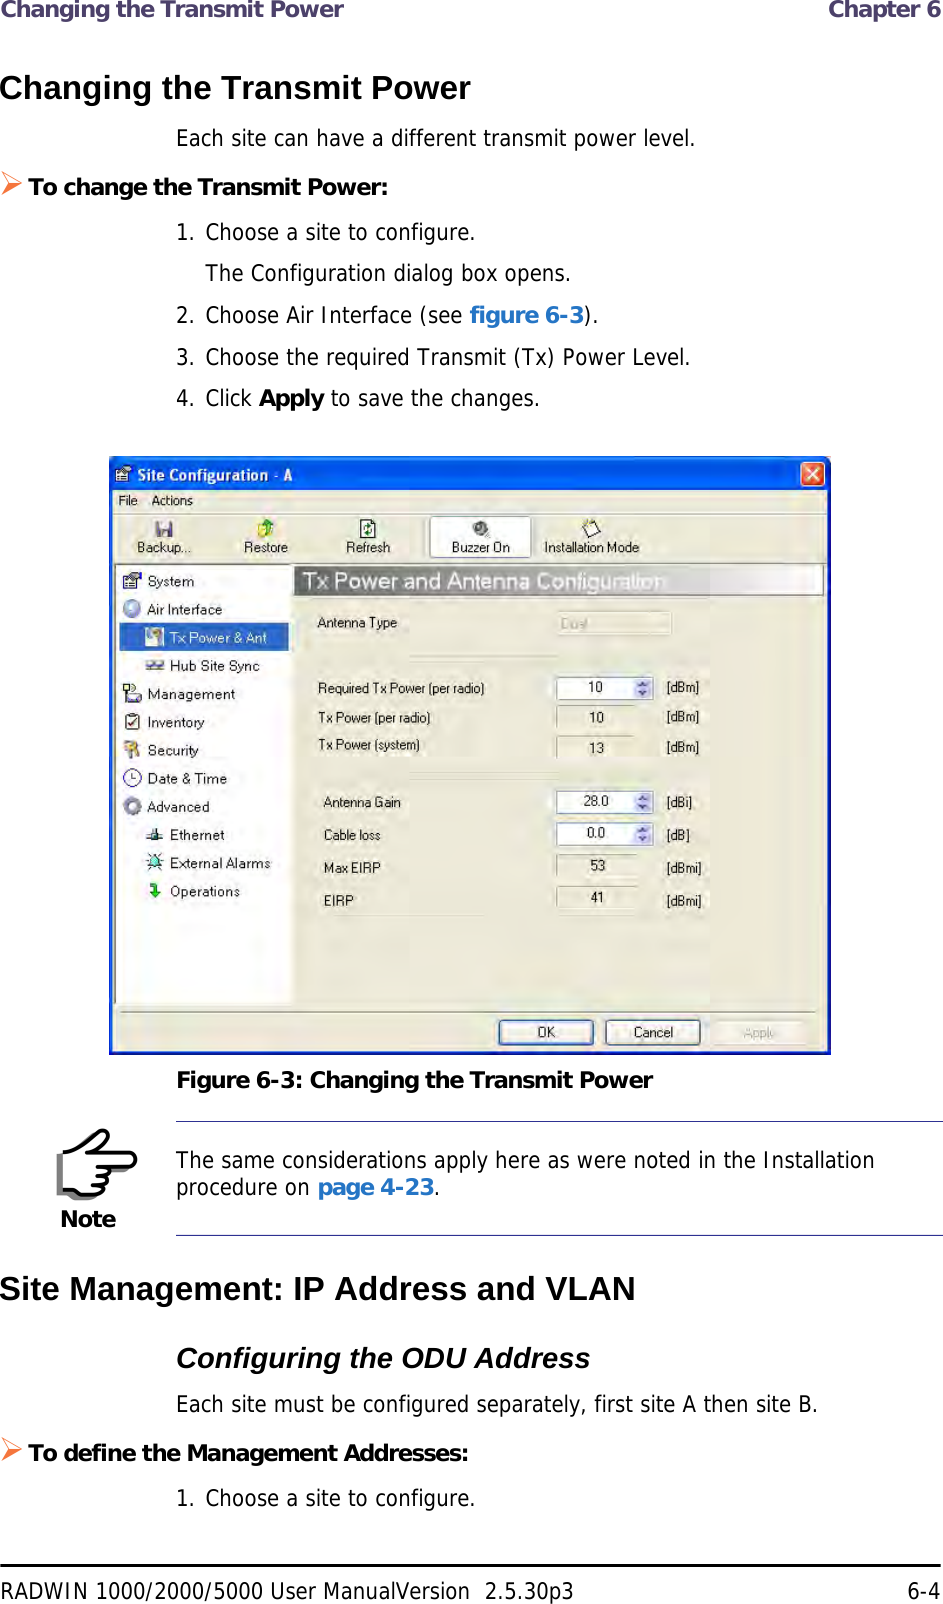 Changing the Transmit Power  Chapter 6RADWIN 1000/2000/5000 User ManualVersion  2.5.30p3 6-4Changing the Transmit PowerEach site can have a different transmit power level. To change the Transmit Power:1. Choose a site to configure.The Configuration dialog box opens.2. Choose Air Interface (see figure 6-3).3. Choose the required Transmit (Tx) Power Level.4. Click Apply to save the changes.Figure 6-3: Changing the Transmit PowerSite Management: IP Address and VLANConfiguring the ODU AddressEach site must be configured separately, first site A then site B.To define the Management Addresses:1. Choose a site to configure.NoteThe same considerations apply here as were noted in the Installation procedure on page 4-23.